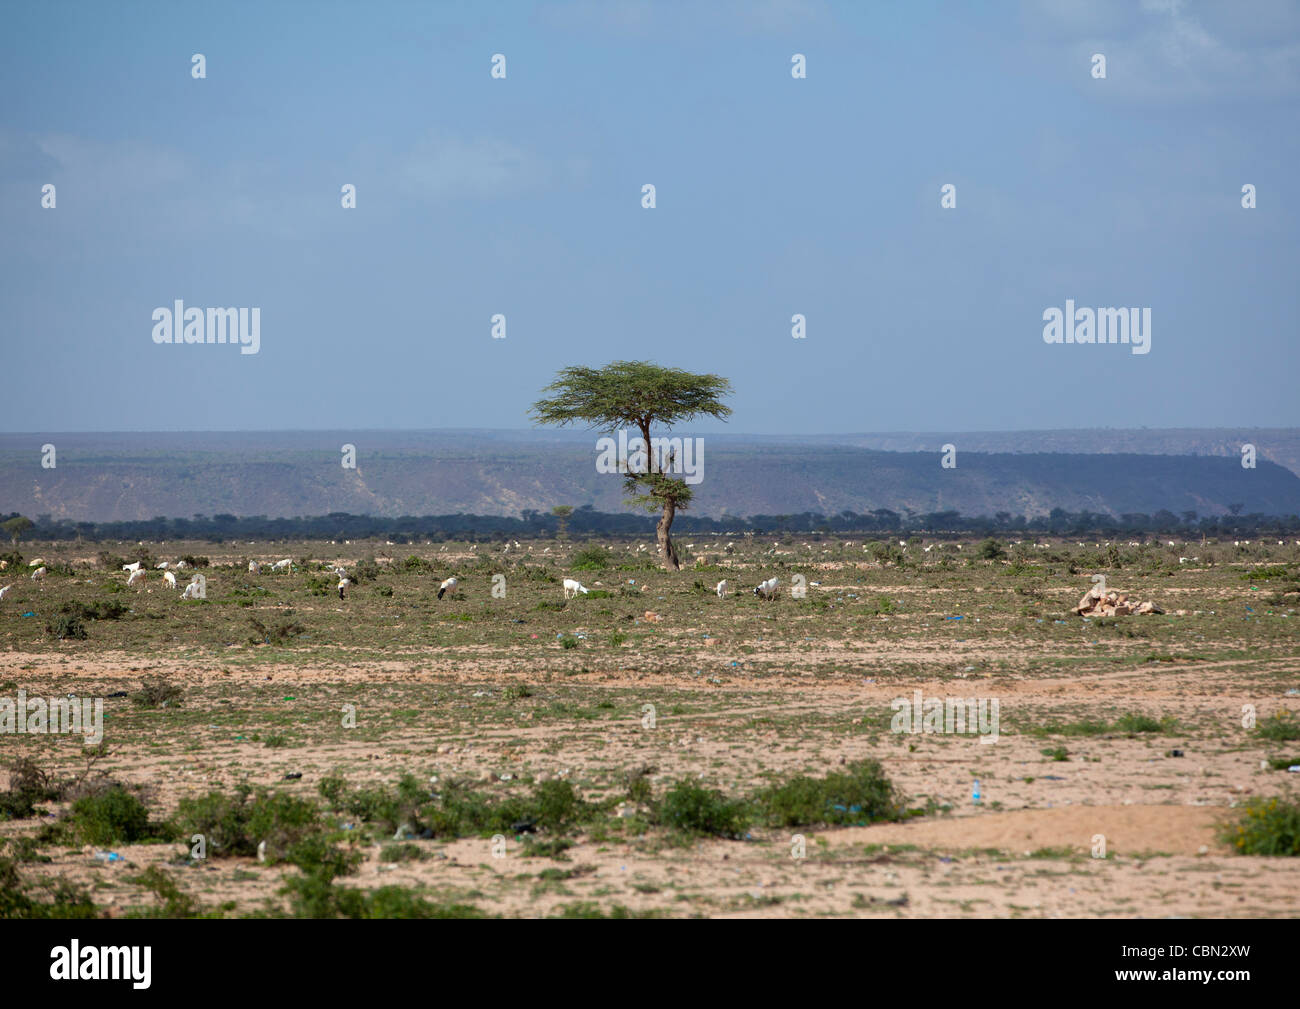 Lonely Tree And Wandering Goats In Arid Landscape Somaliland Stock Photo